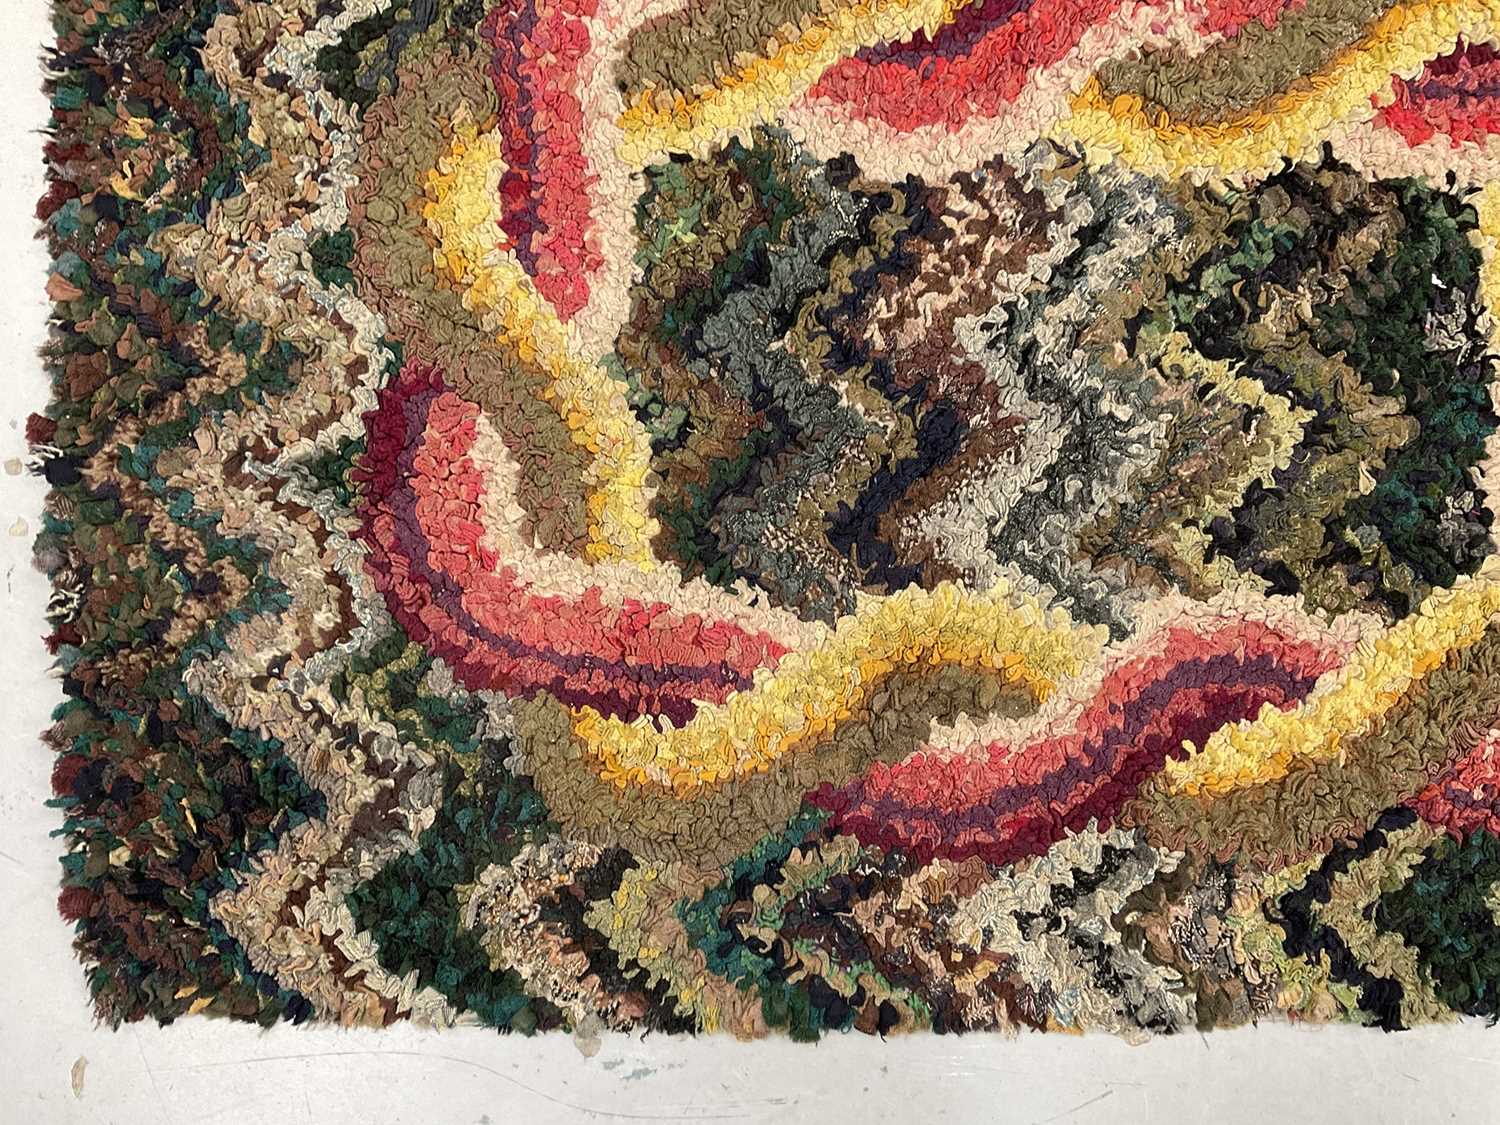 Omega style rag rug with abstract design with flame motif, 102 x 66cm - Image 2 of 5